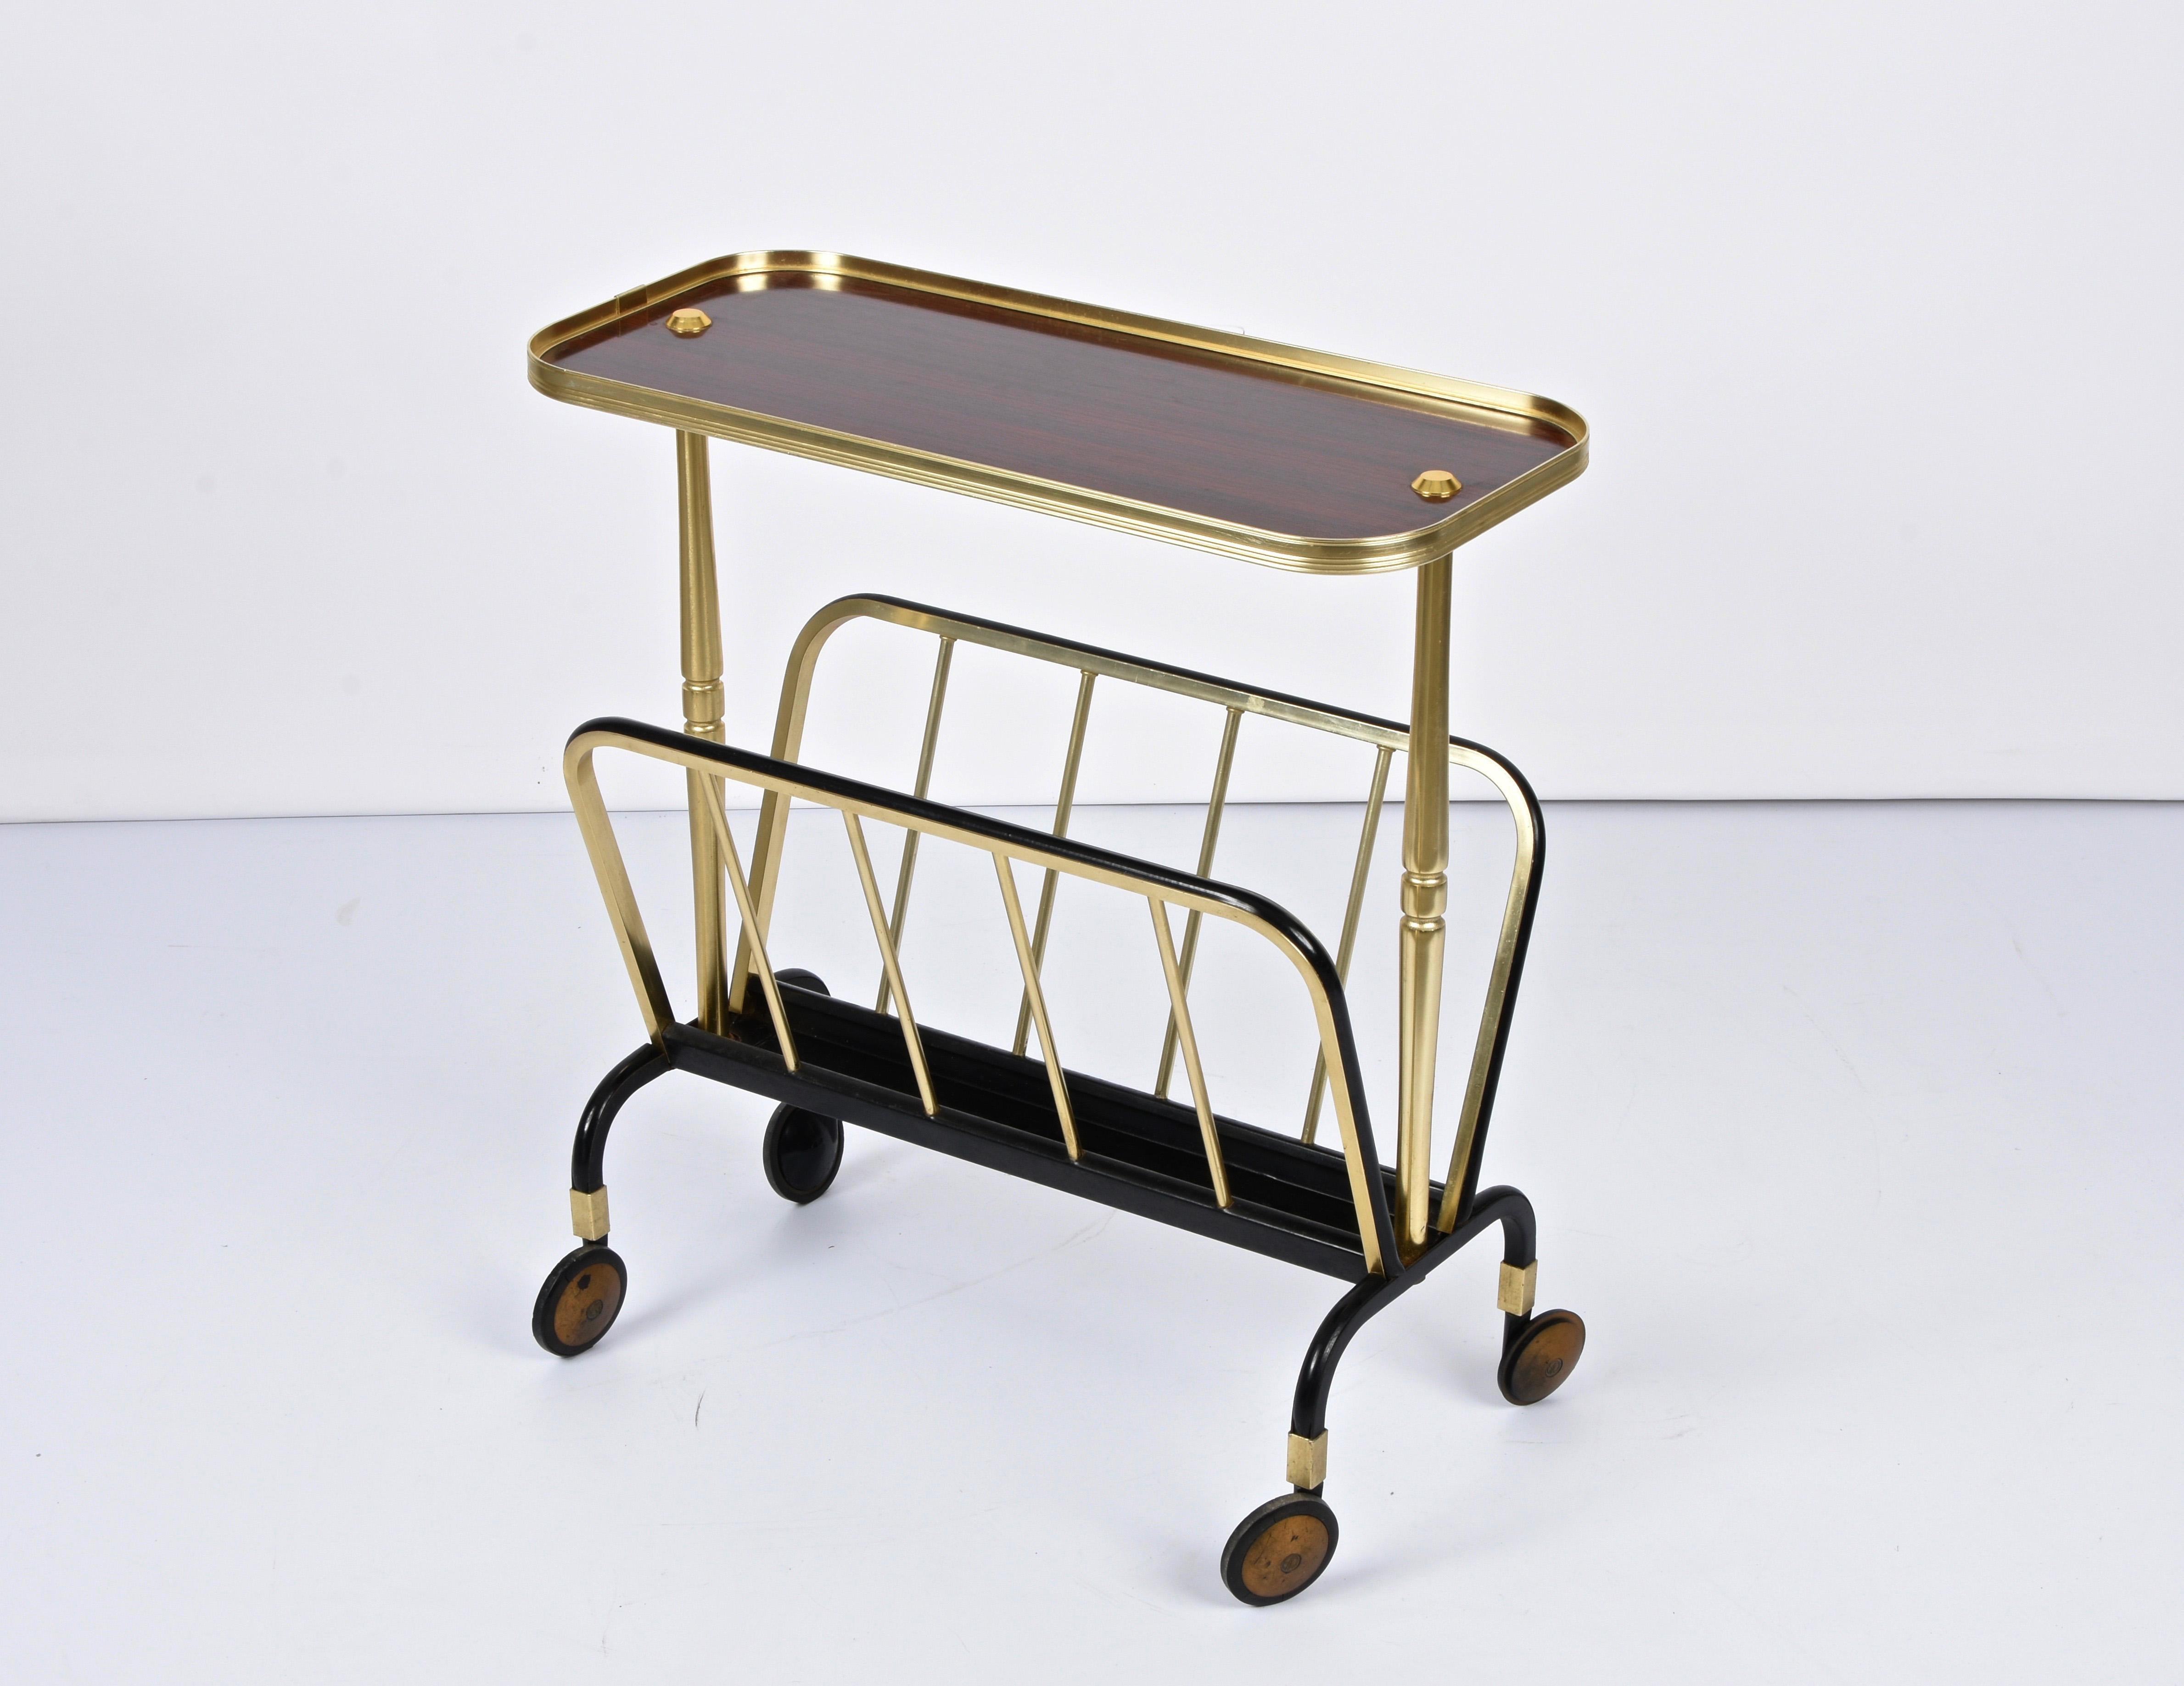 Anodized Ico Parisi Midcentury Aluminum and Formica Trolley Magazine Rack for MB, 1960s For Sale